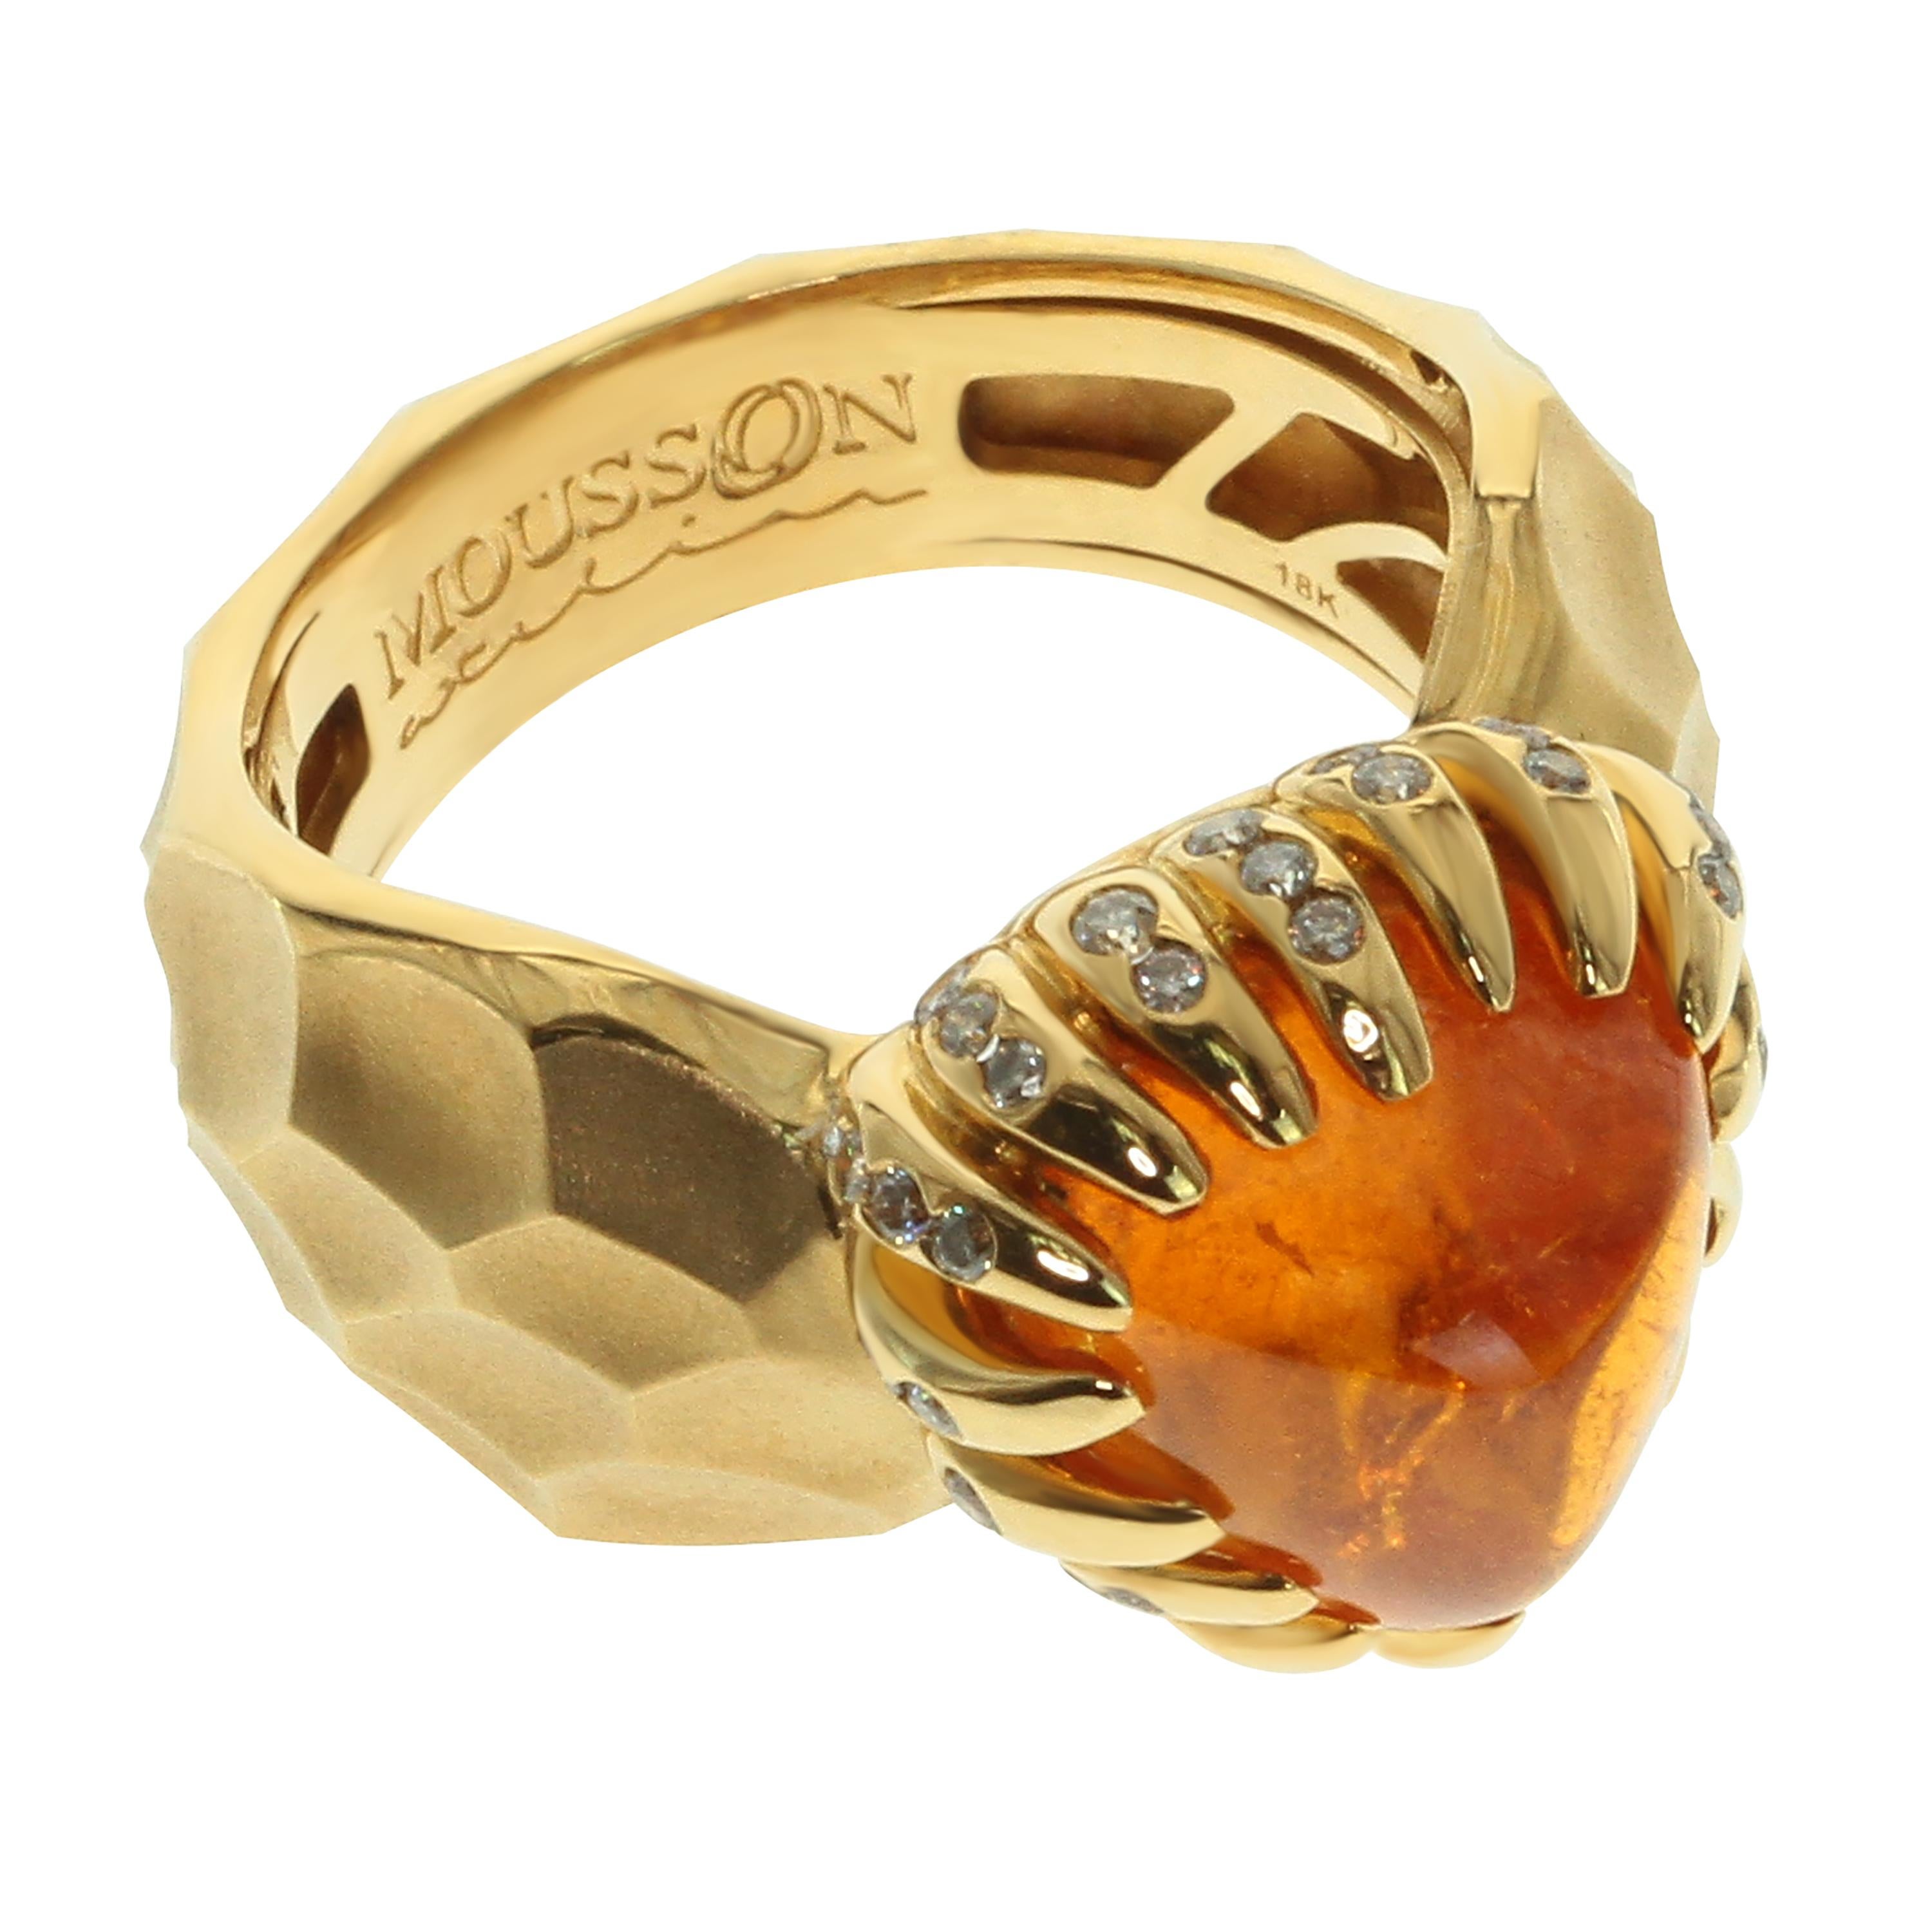 Spessartine Cabochon Champagne Diamonds 18 Karat Yellow Gold Ring.
Imagine a warm golden autumn with its bright colors. Trillion Cabochon shaped Spessartin 6.74 carat absorbed all the richness of autumn colors and appeared in front of you in this